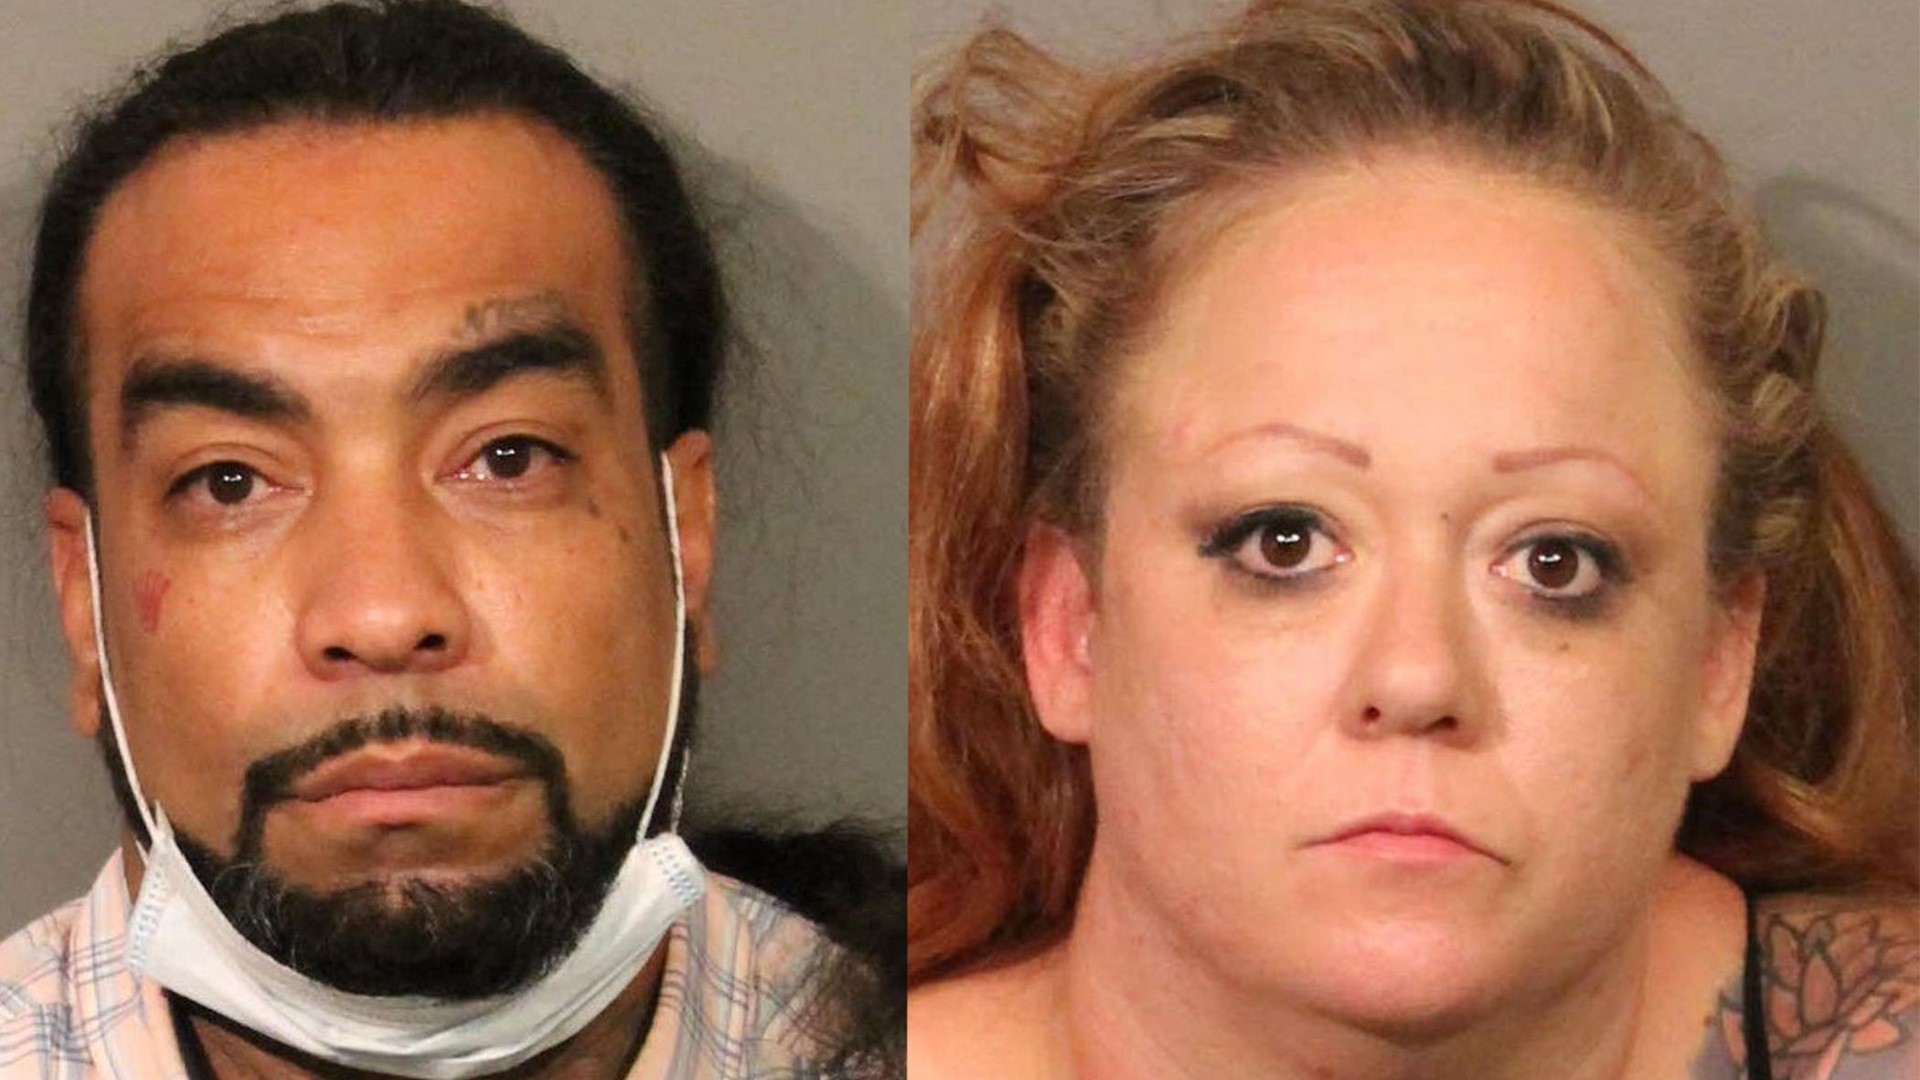 Roseville police said they arrested the victim's mother and her boyfriend after they learned the man's car was connected to a recent drive-by shooting.